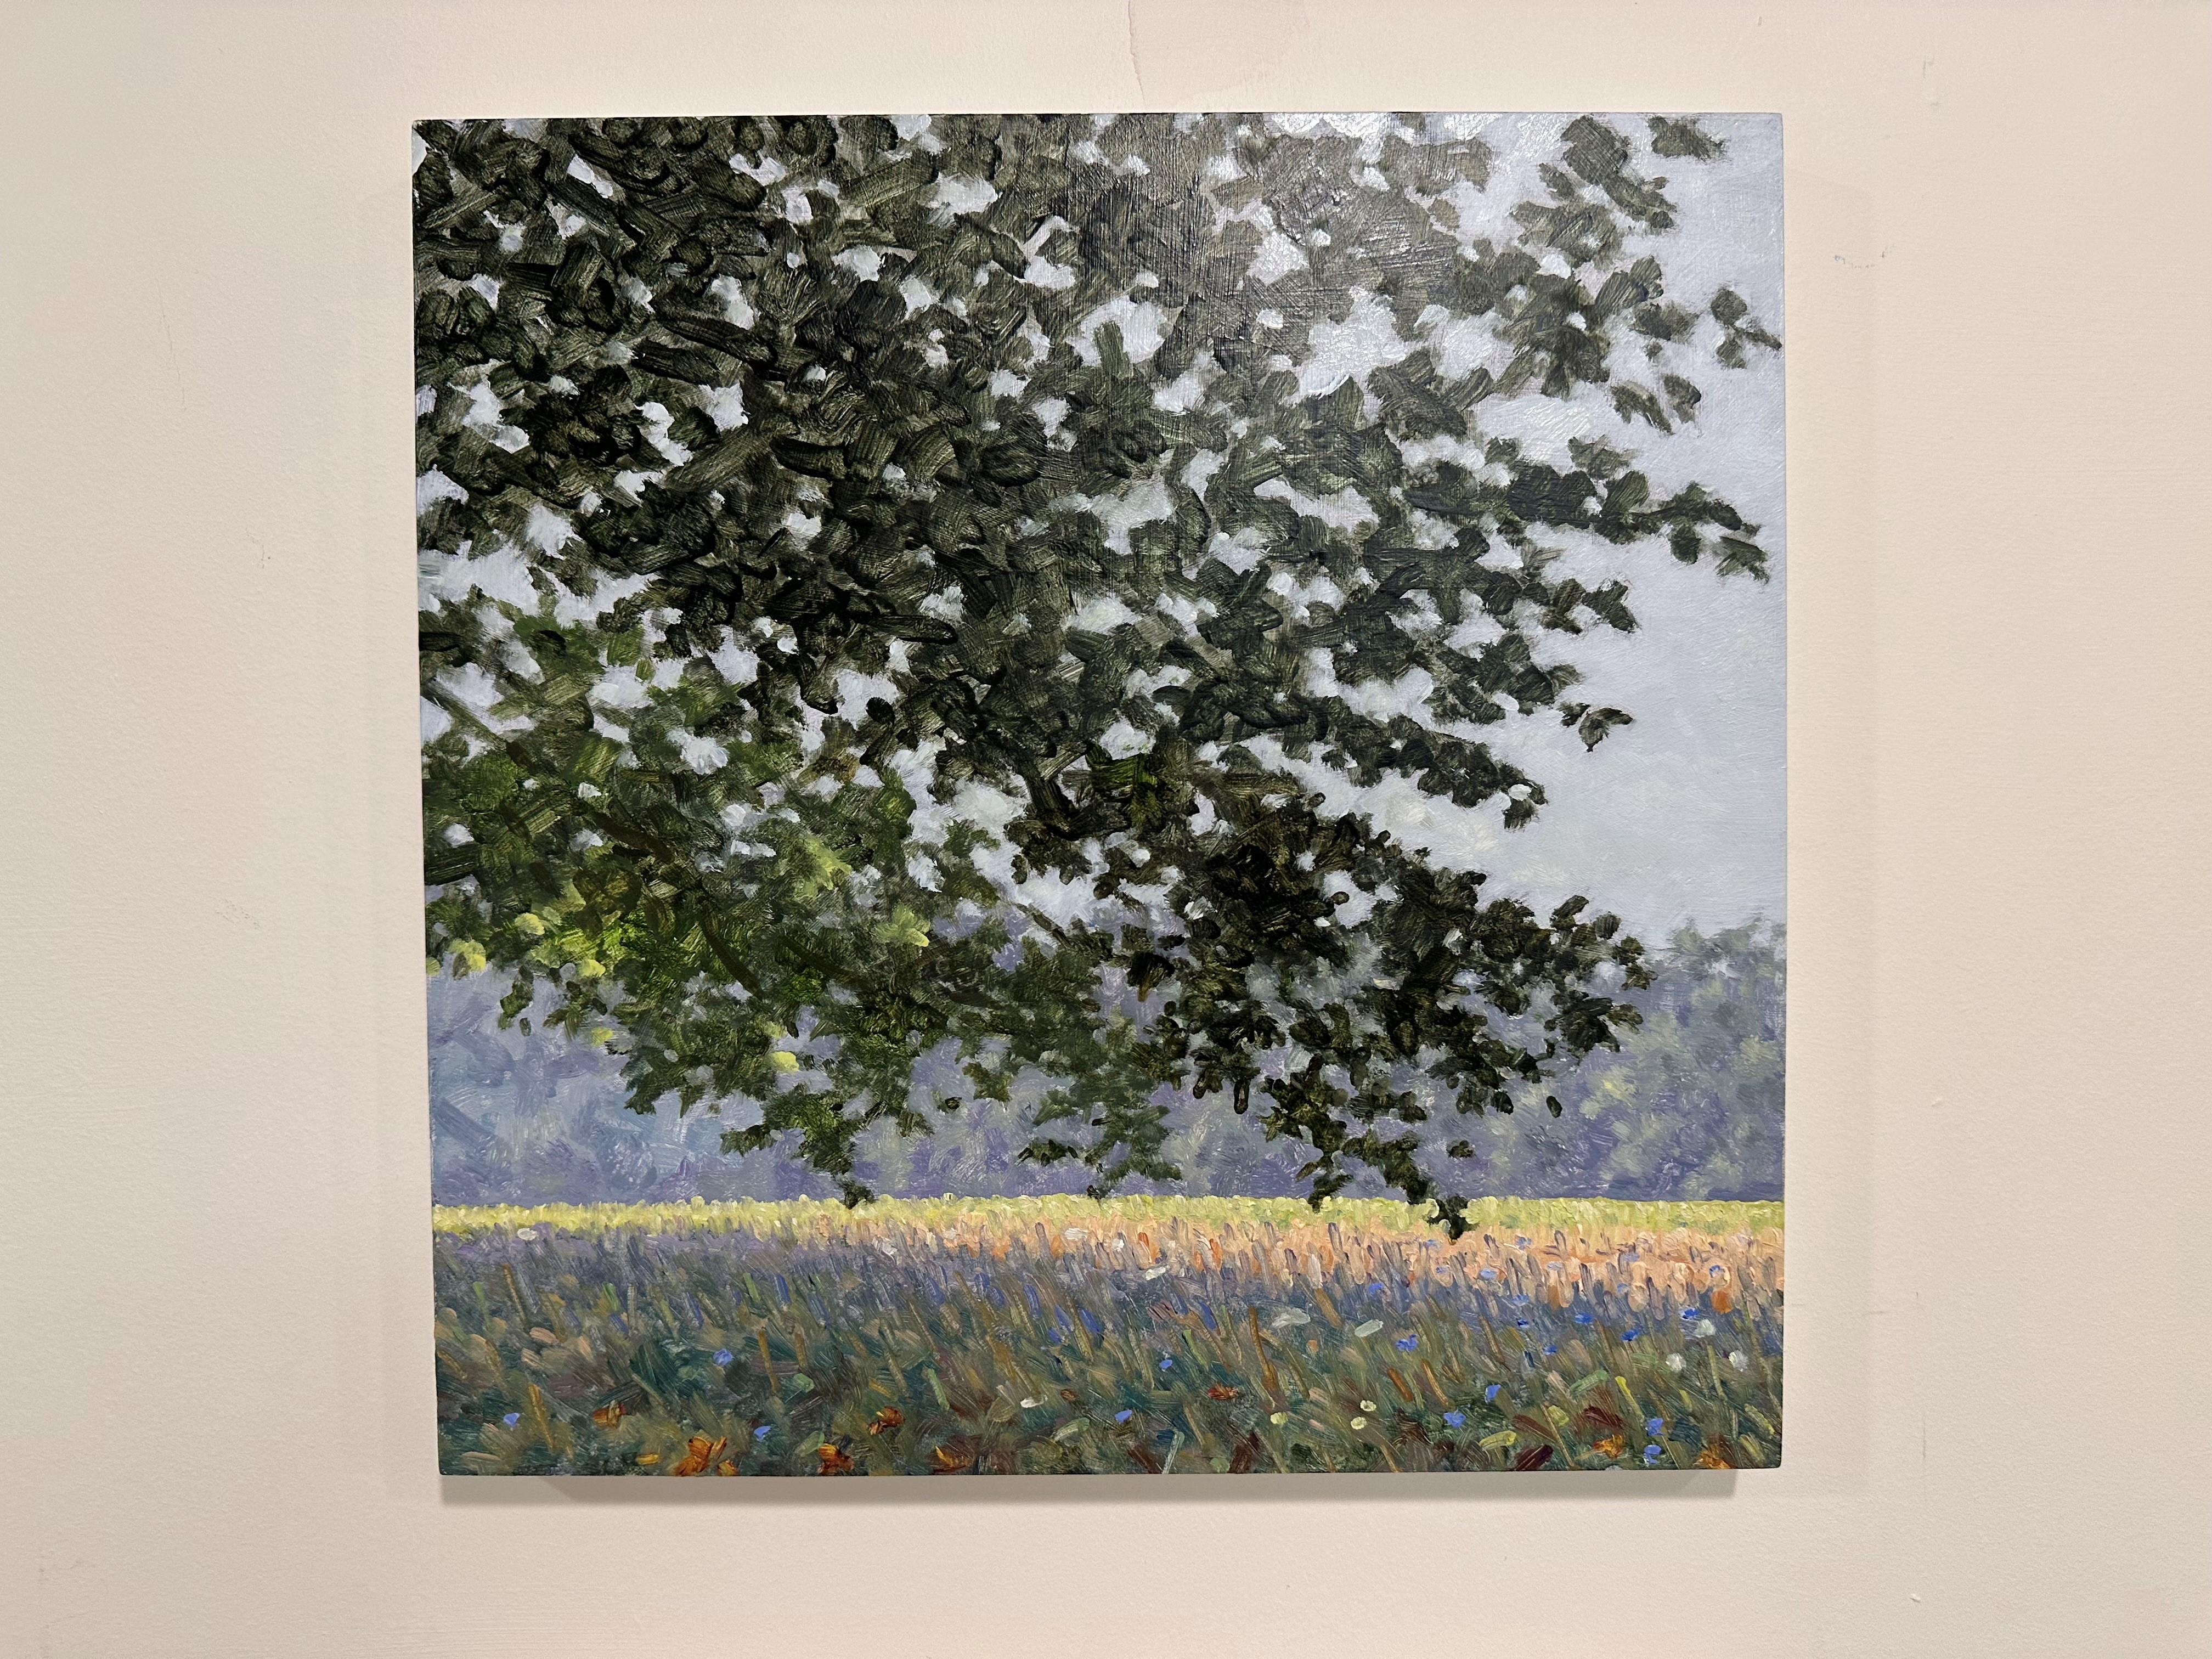 Field Painting August 24 2020, Flowers in Green Field, Trees, Late Summer - Gray Landscape Painting by Thomas Sarrantonio